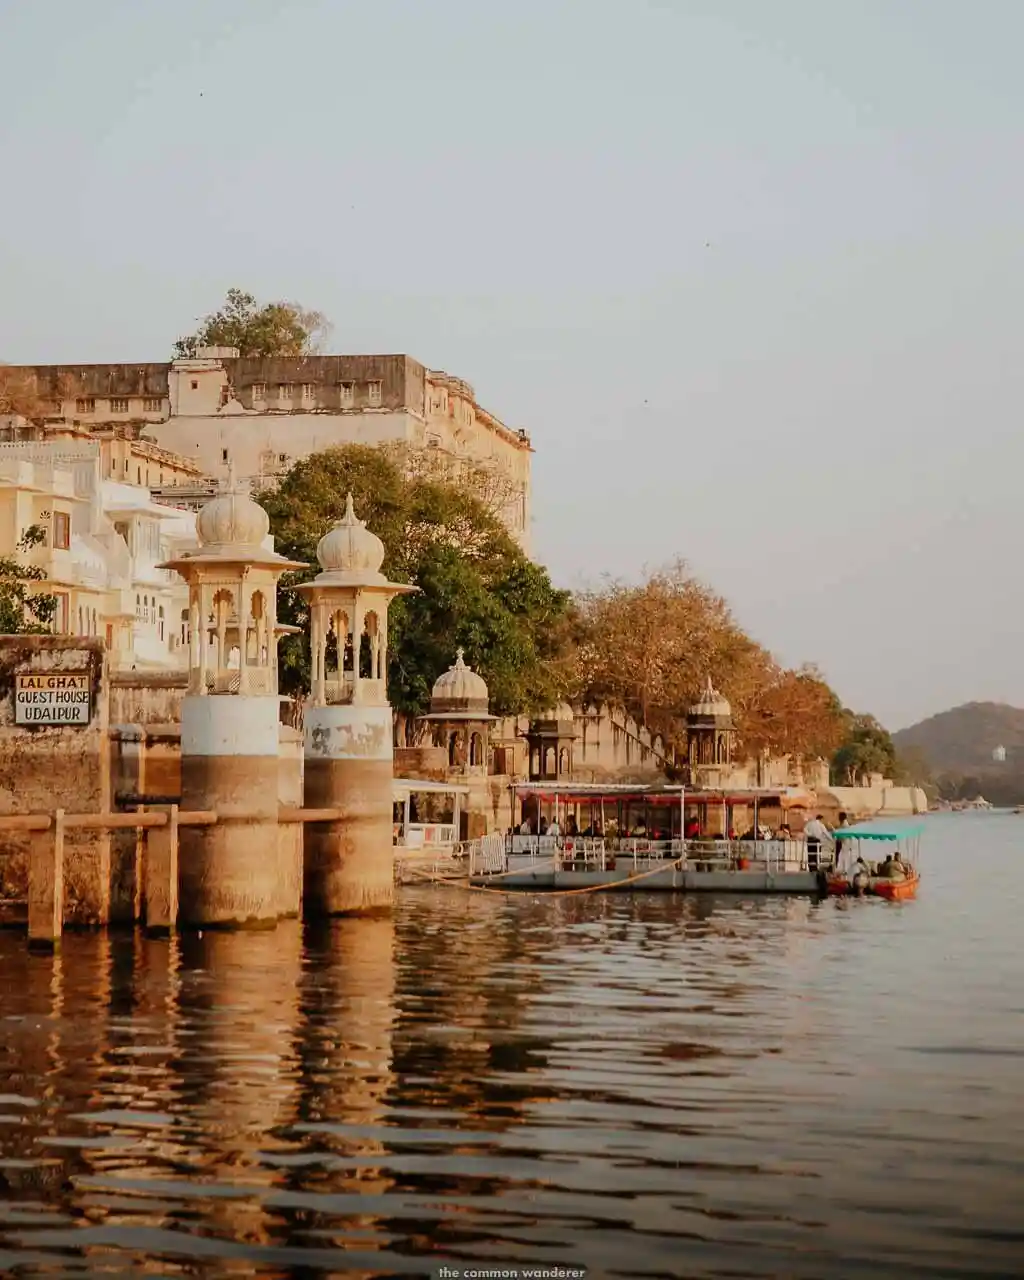 The city of Udaipur; Source : the common wanderer